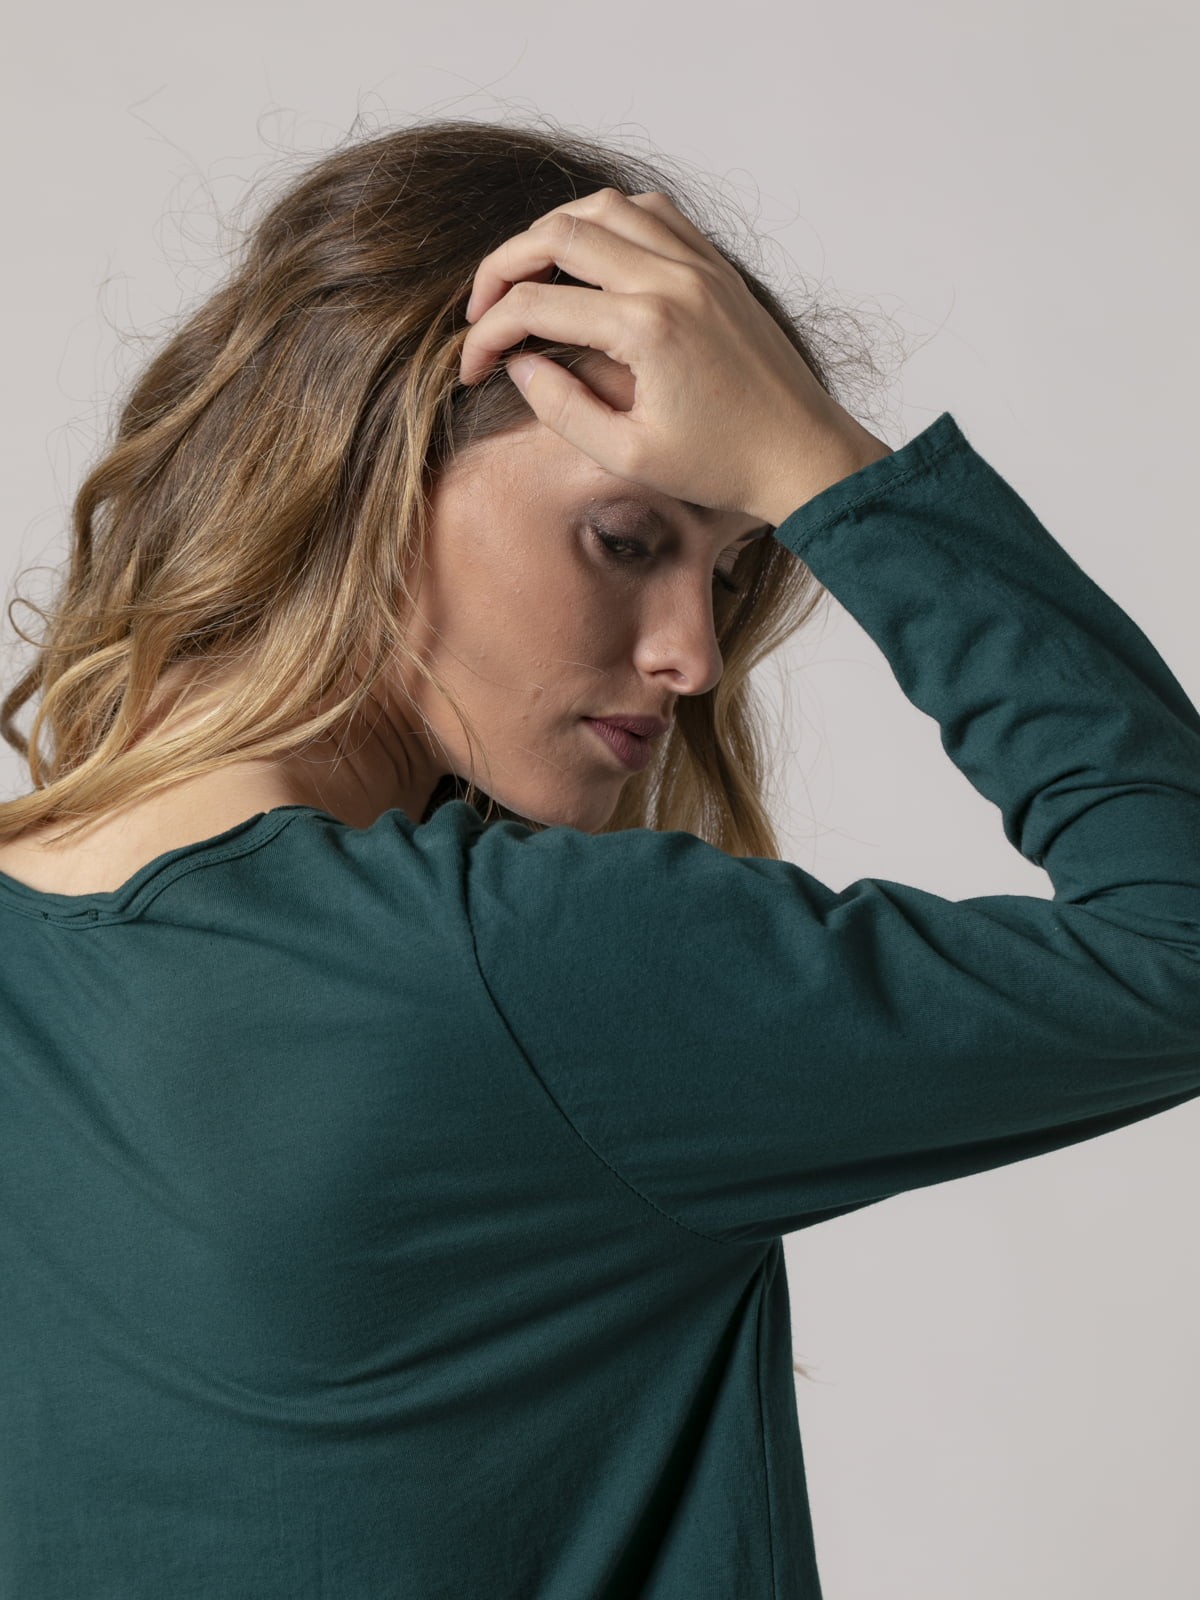 Woman Long-sleeved cotton t-shirt with rounded neckline Green